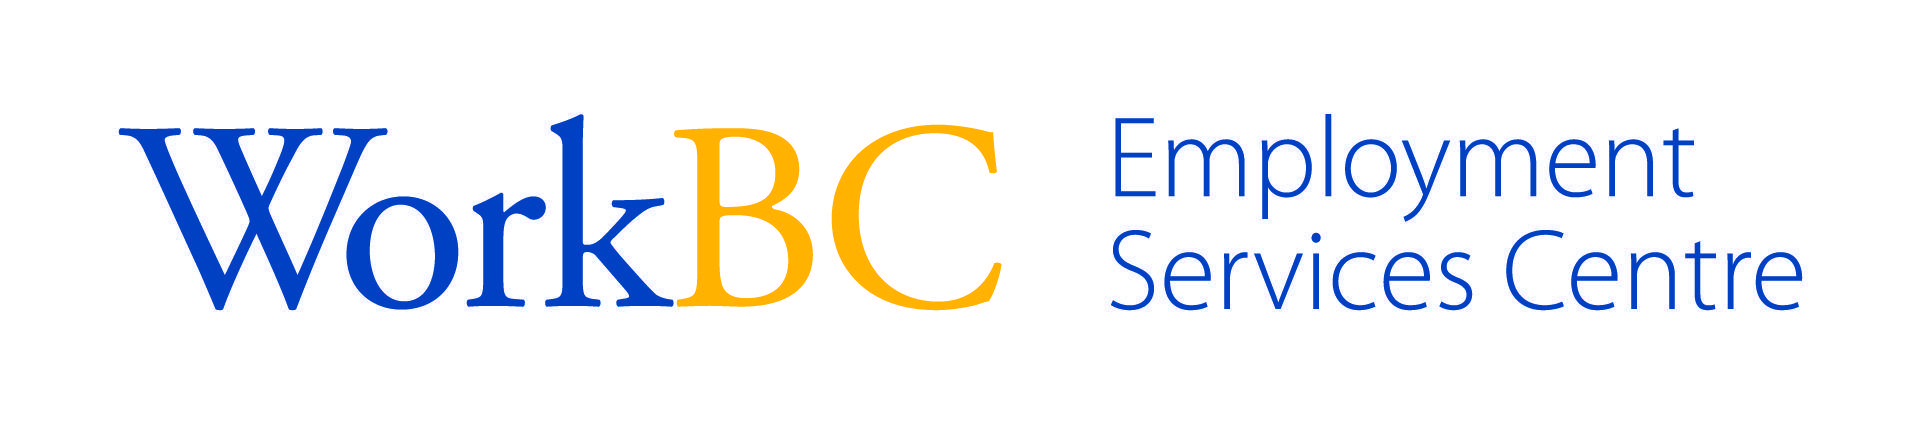 Employment Service Logo - Youth Employment Hub | Employment, Youth Services in BC | PCRS